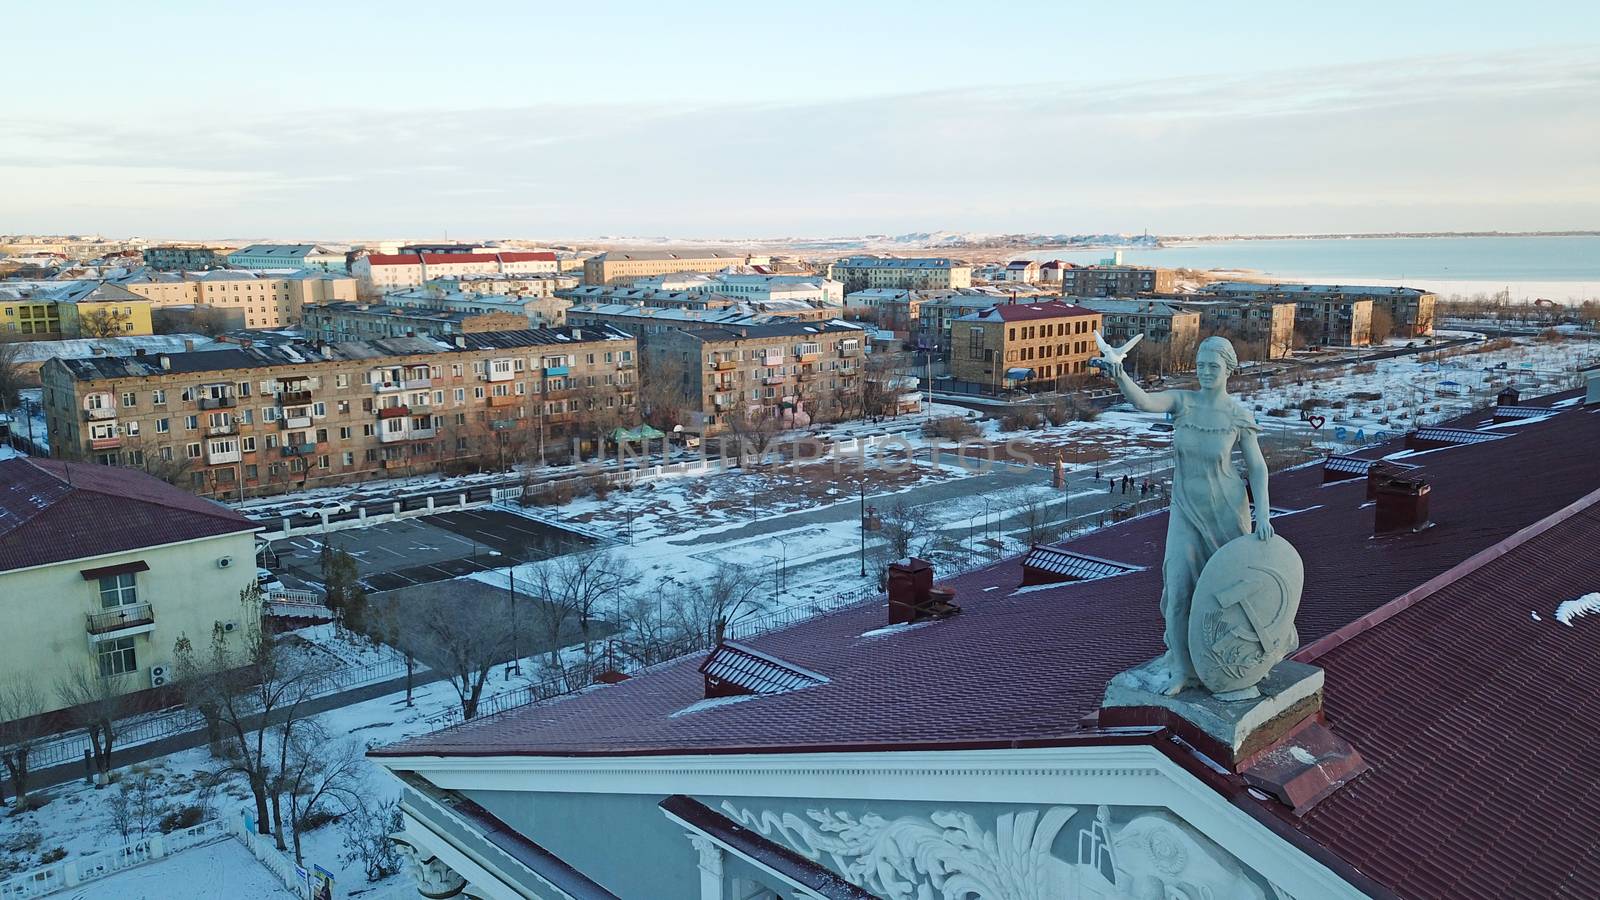 Statue of a woman with a shield on the roof of the Palace. Red tiles on the roof. View of the lake, houses and sunset. The small town of Balkhash in winter.